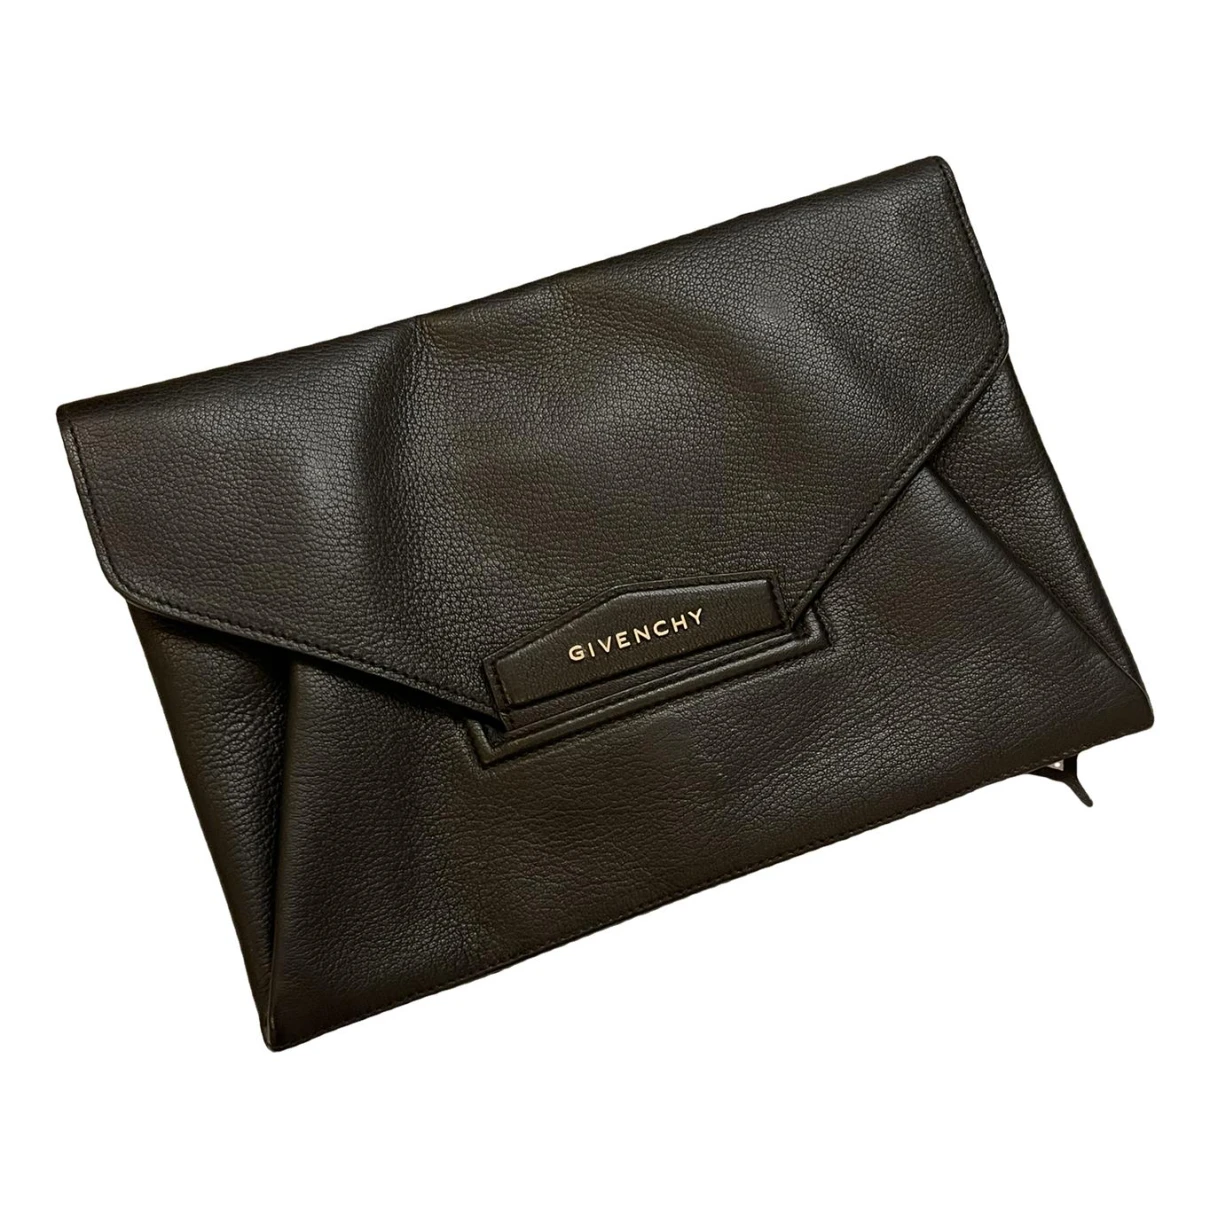 Pre-owned Givenchy Antigona Leather Clutch Bag In Black